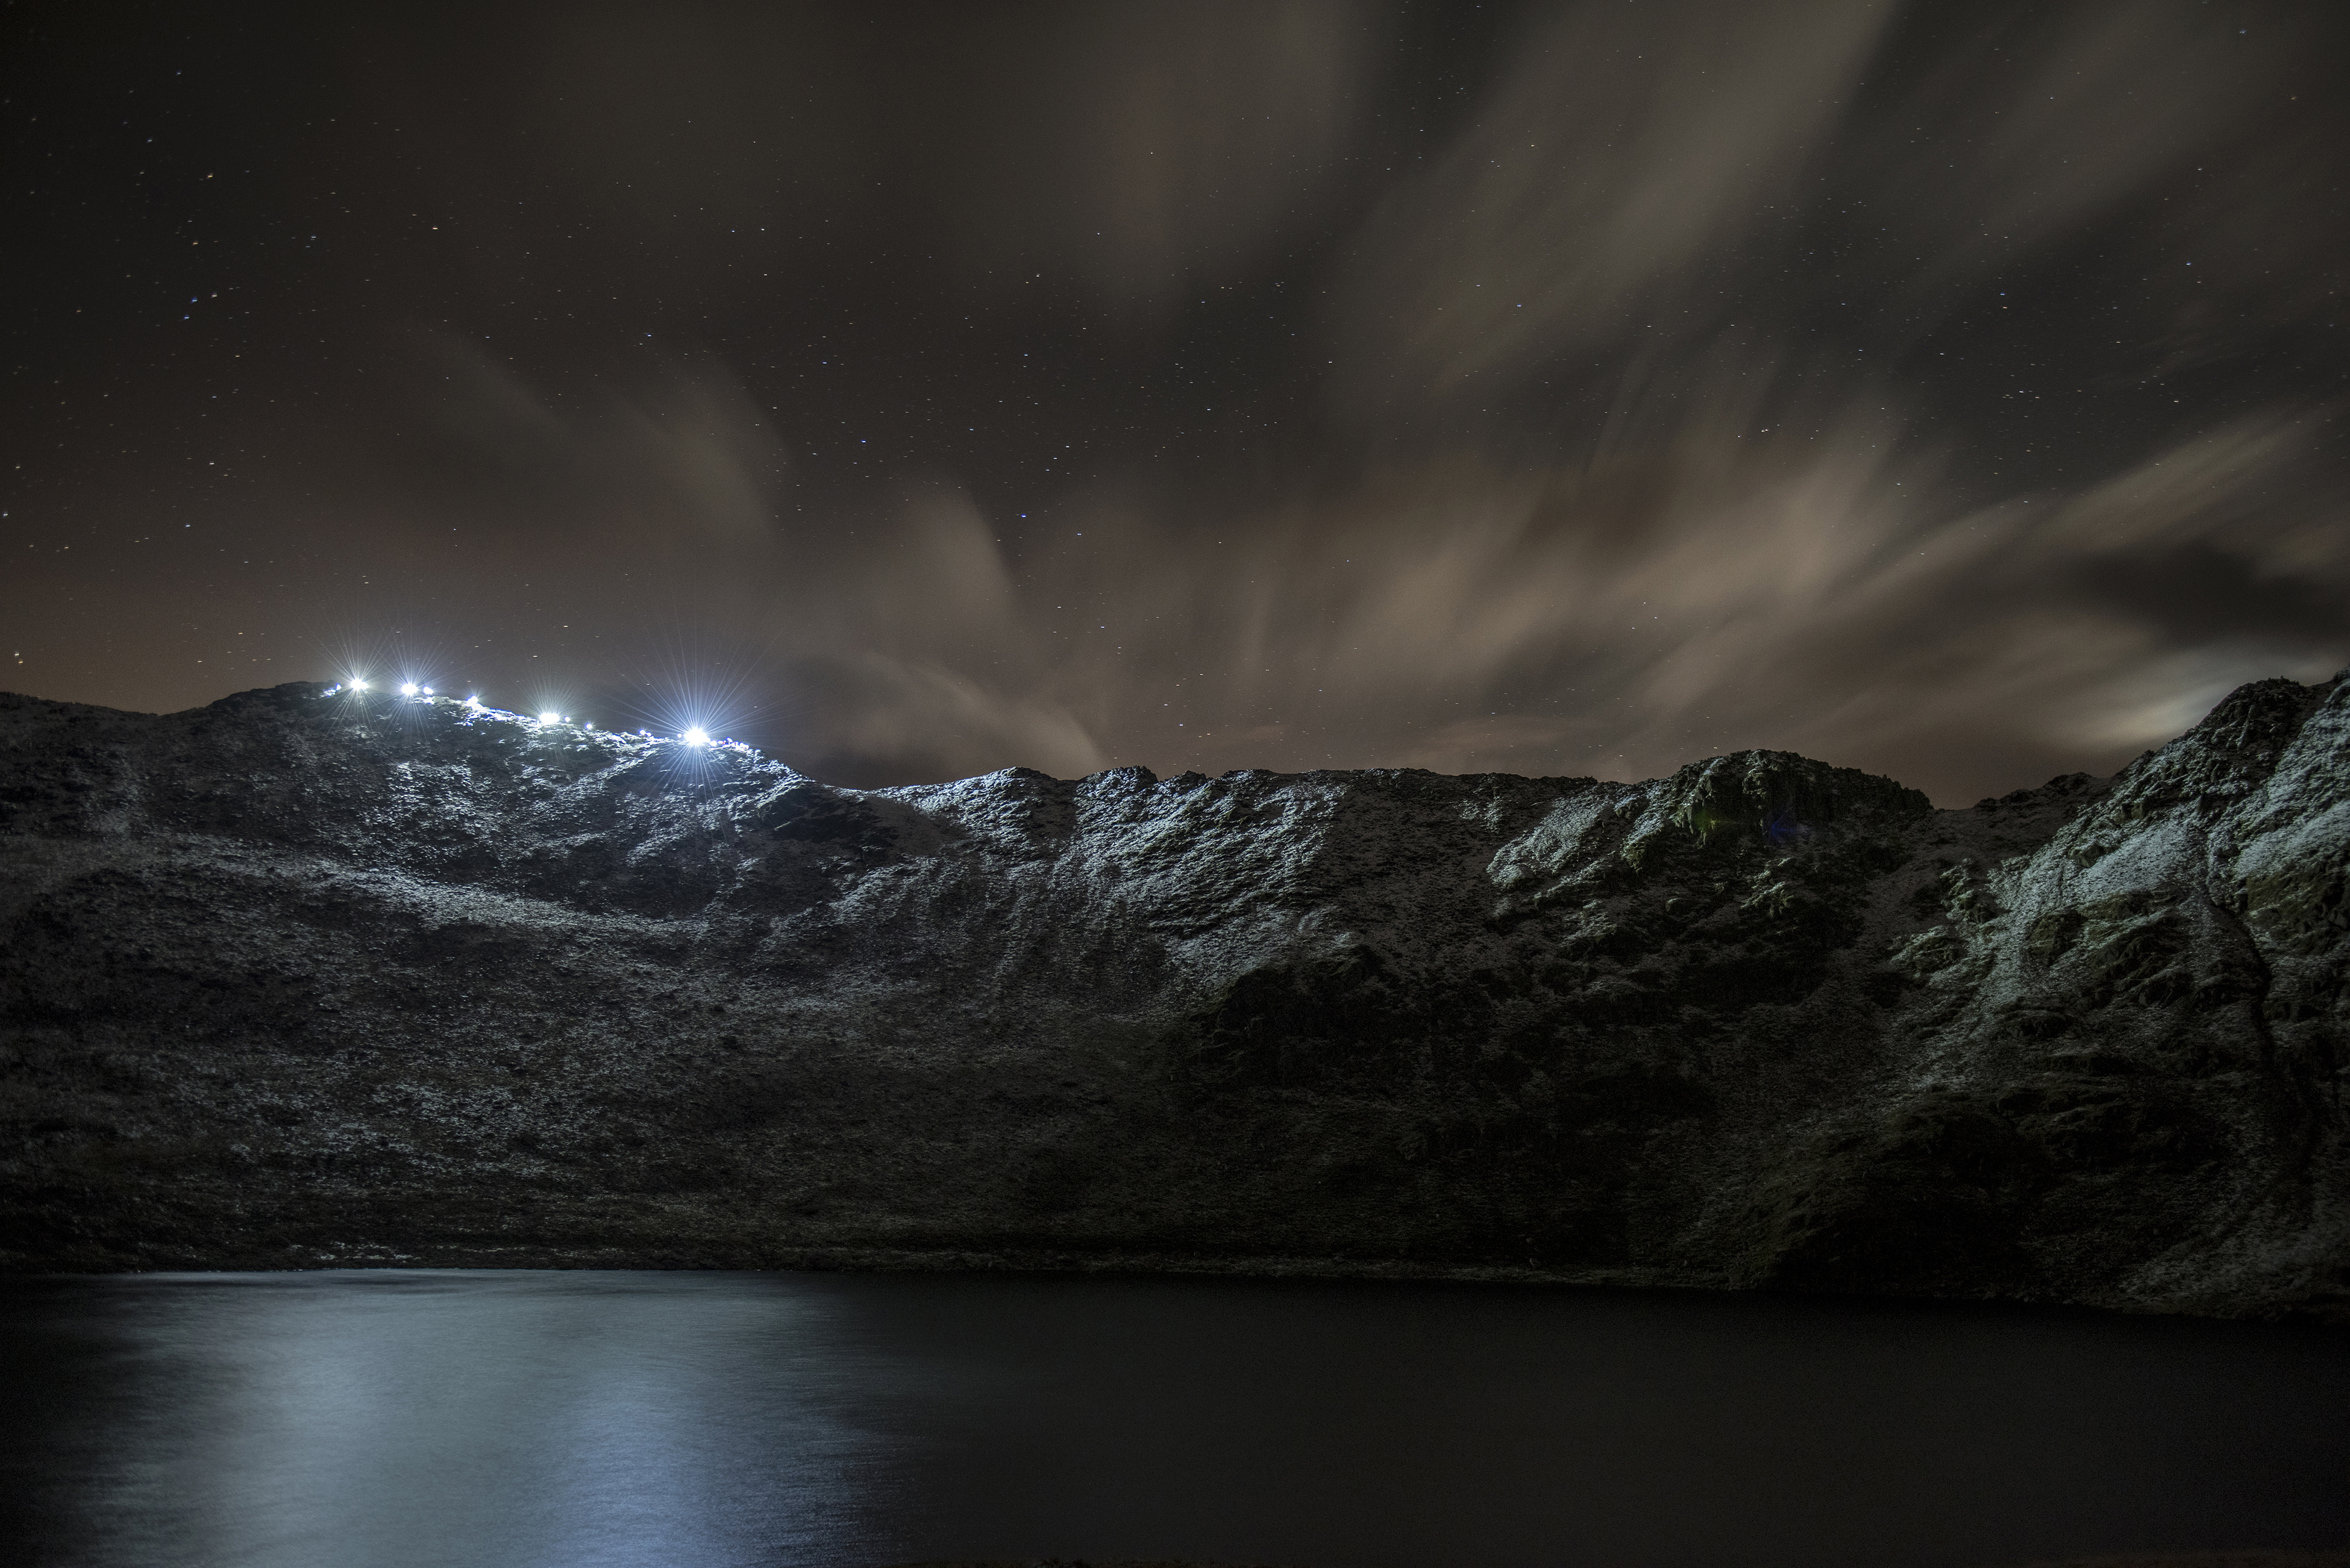 Nature Landscape Mountains Clouds Night Long Exposure Torches Lights Water Stars Reflection 4000x2669